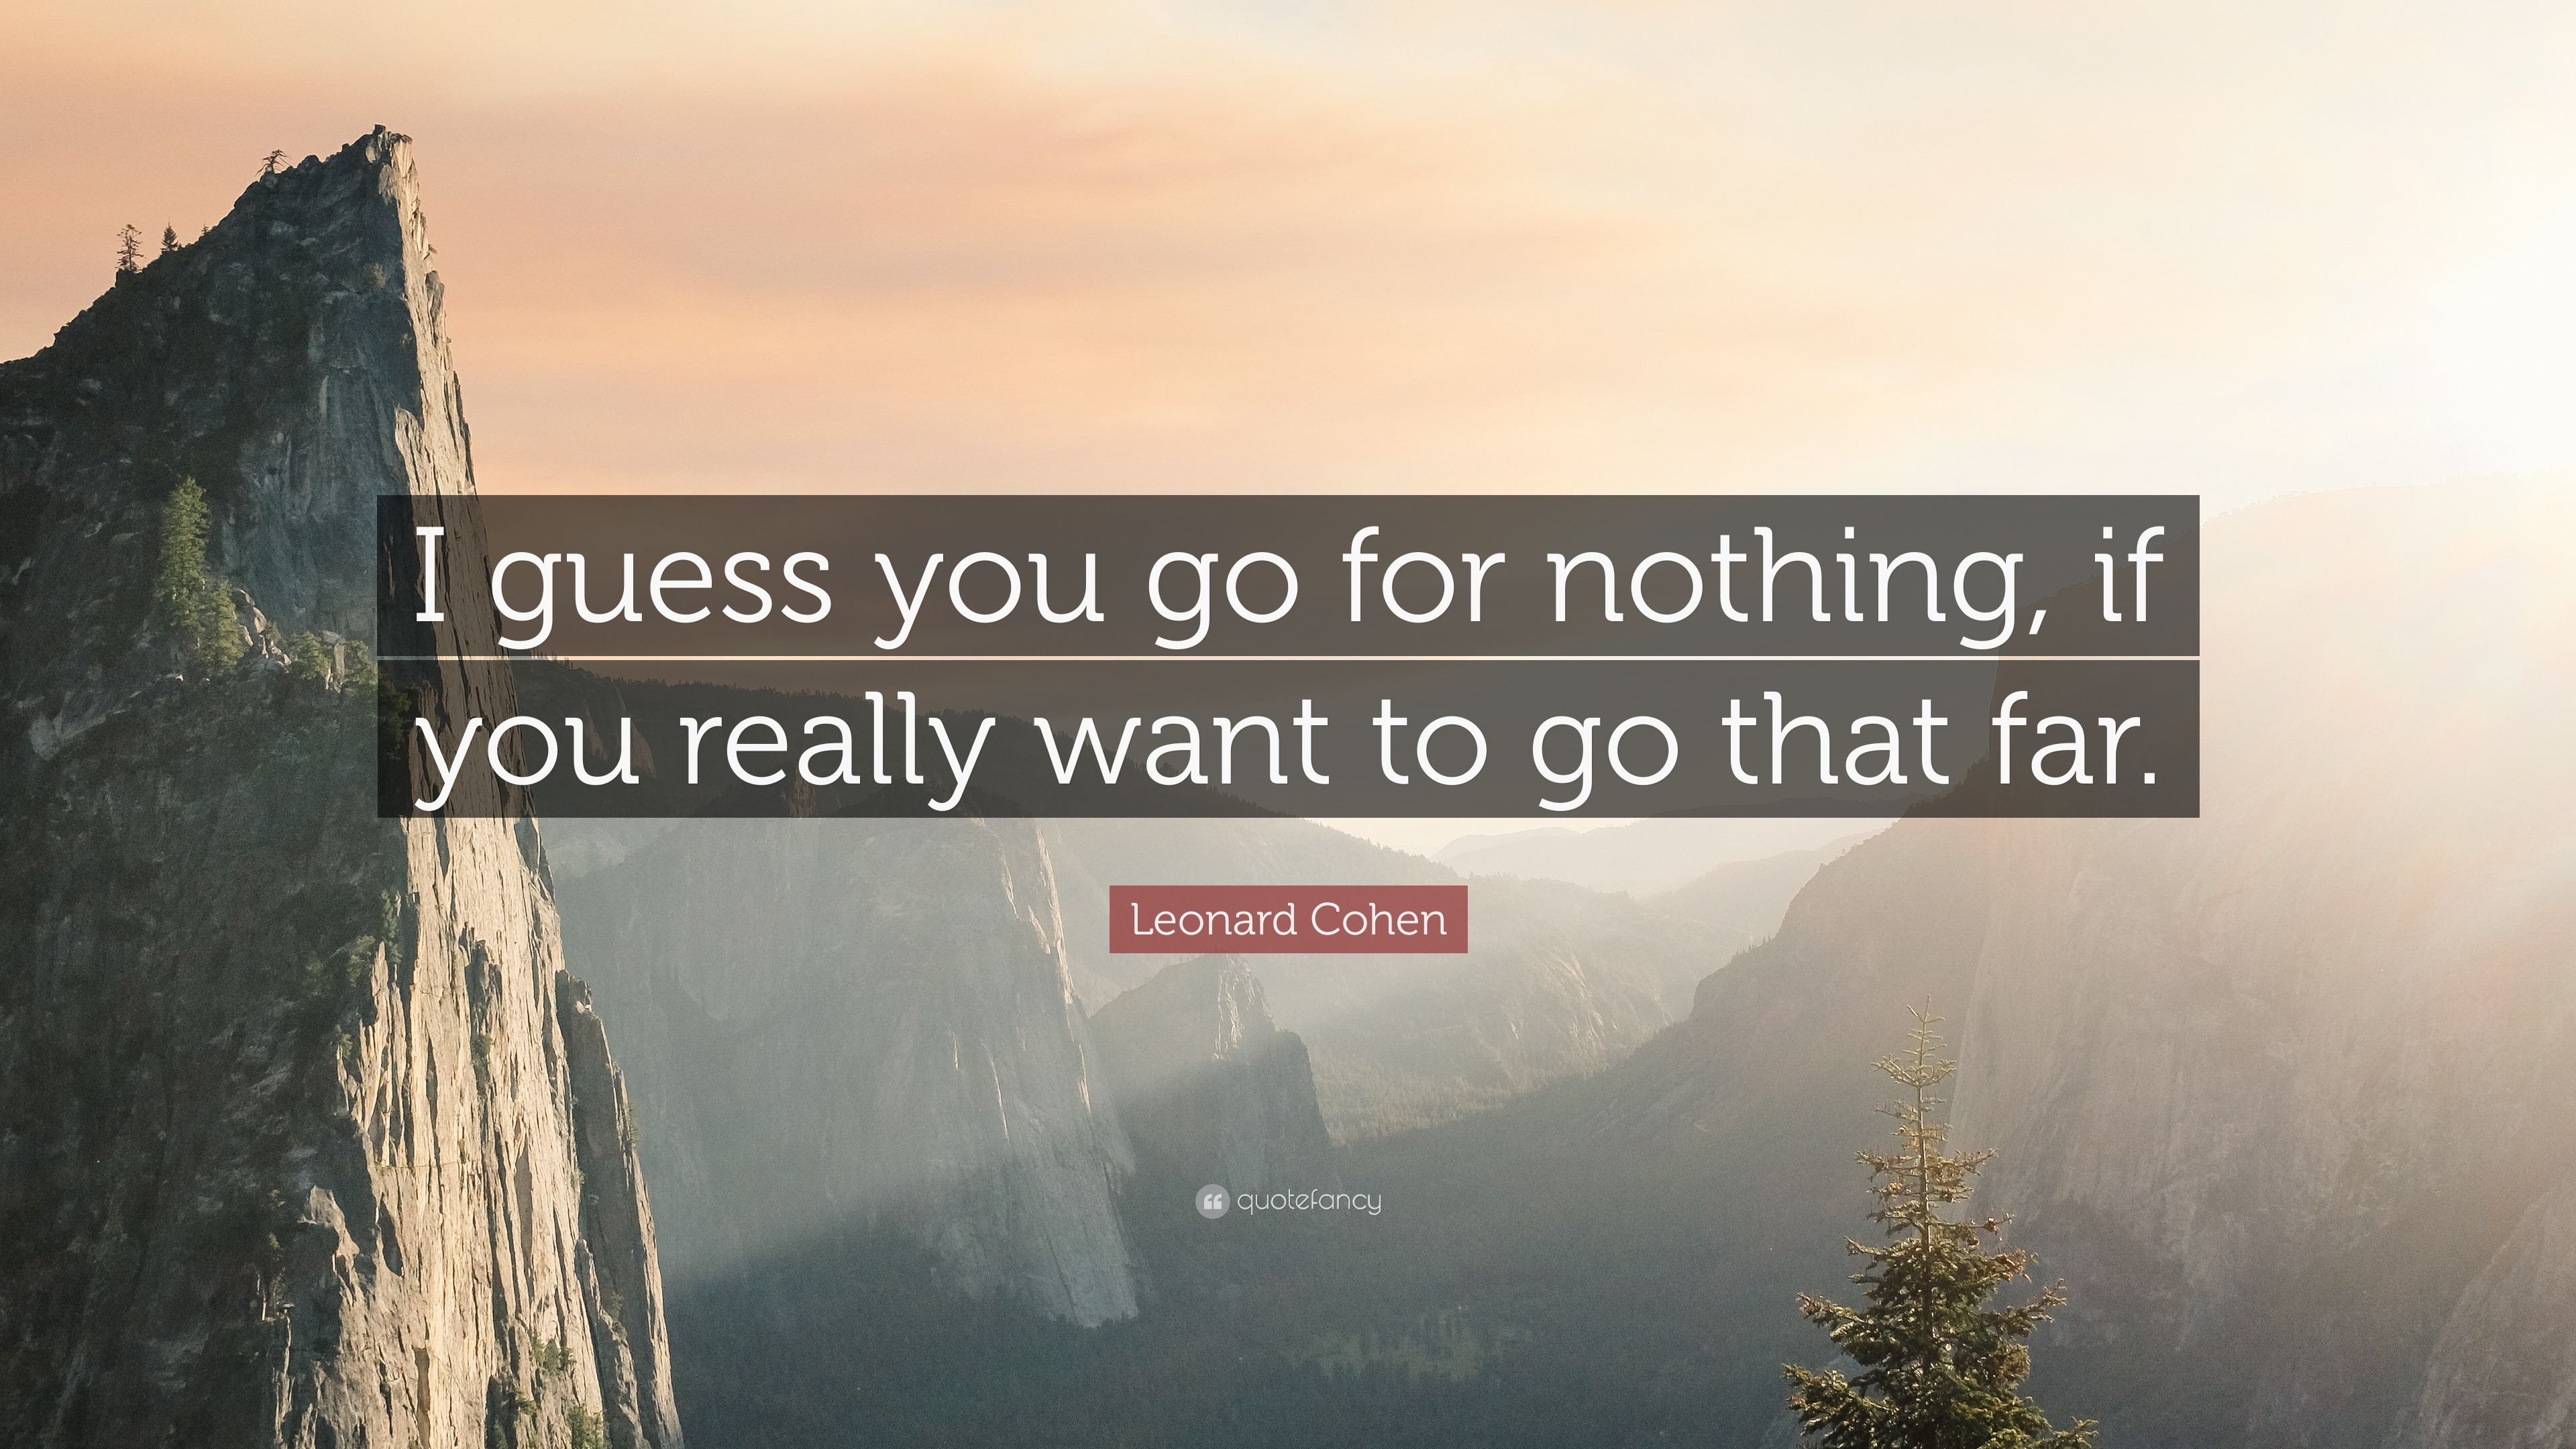 Leonard Quote: guess you go if you really want to go that